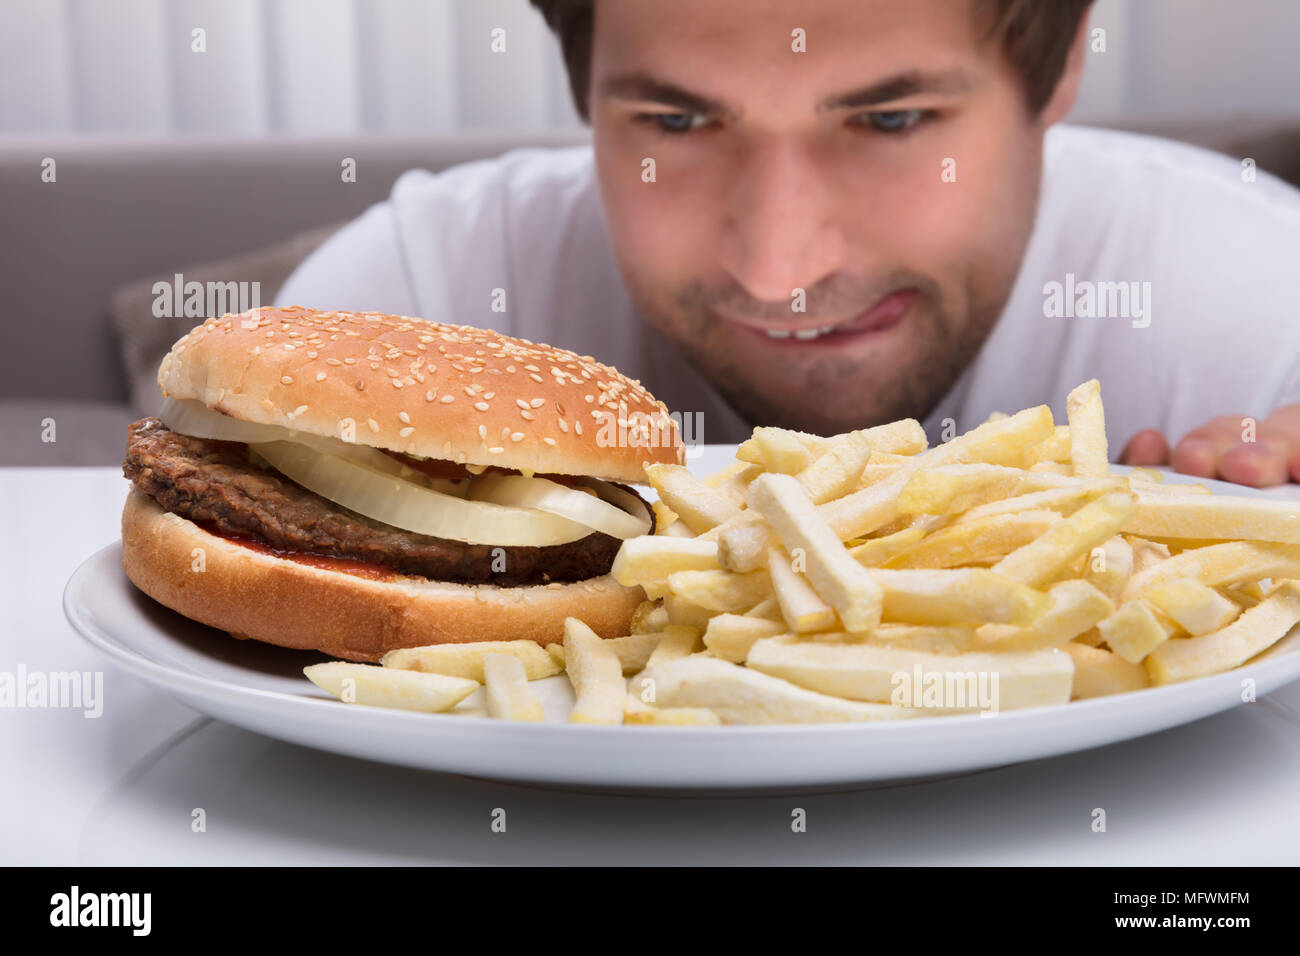 Close-up Of A Young Man Looking At Burger And French Fries On Plate Stock Photo